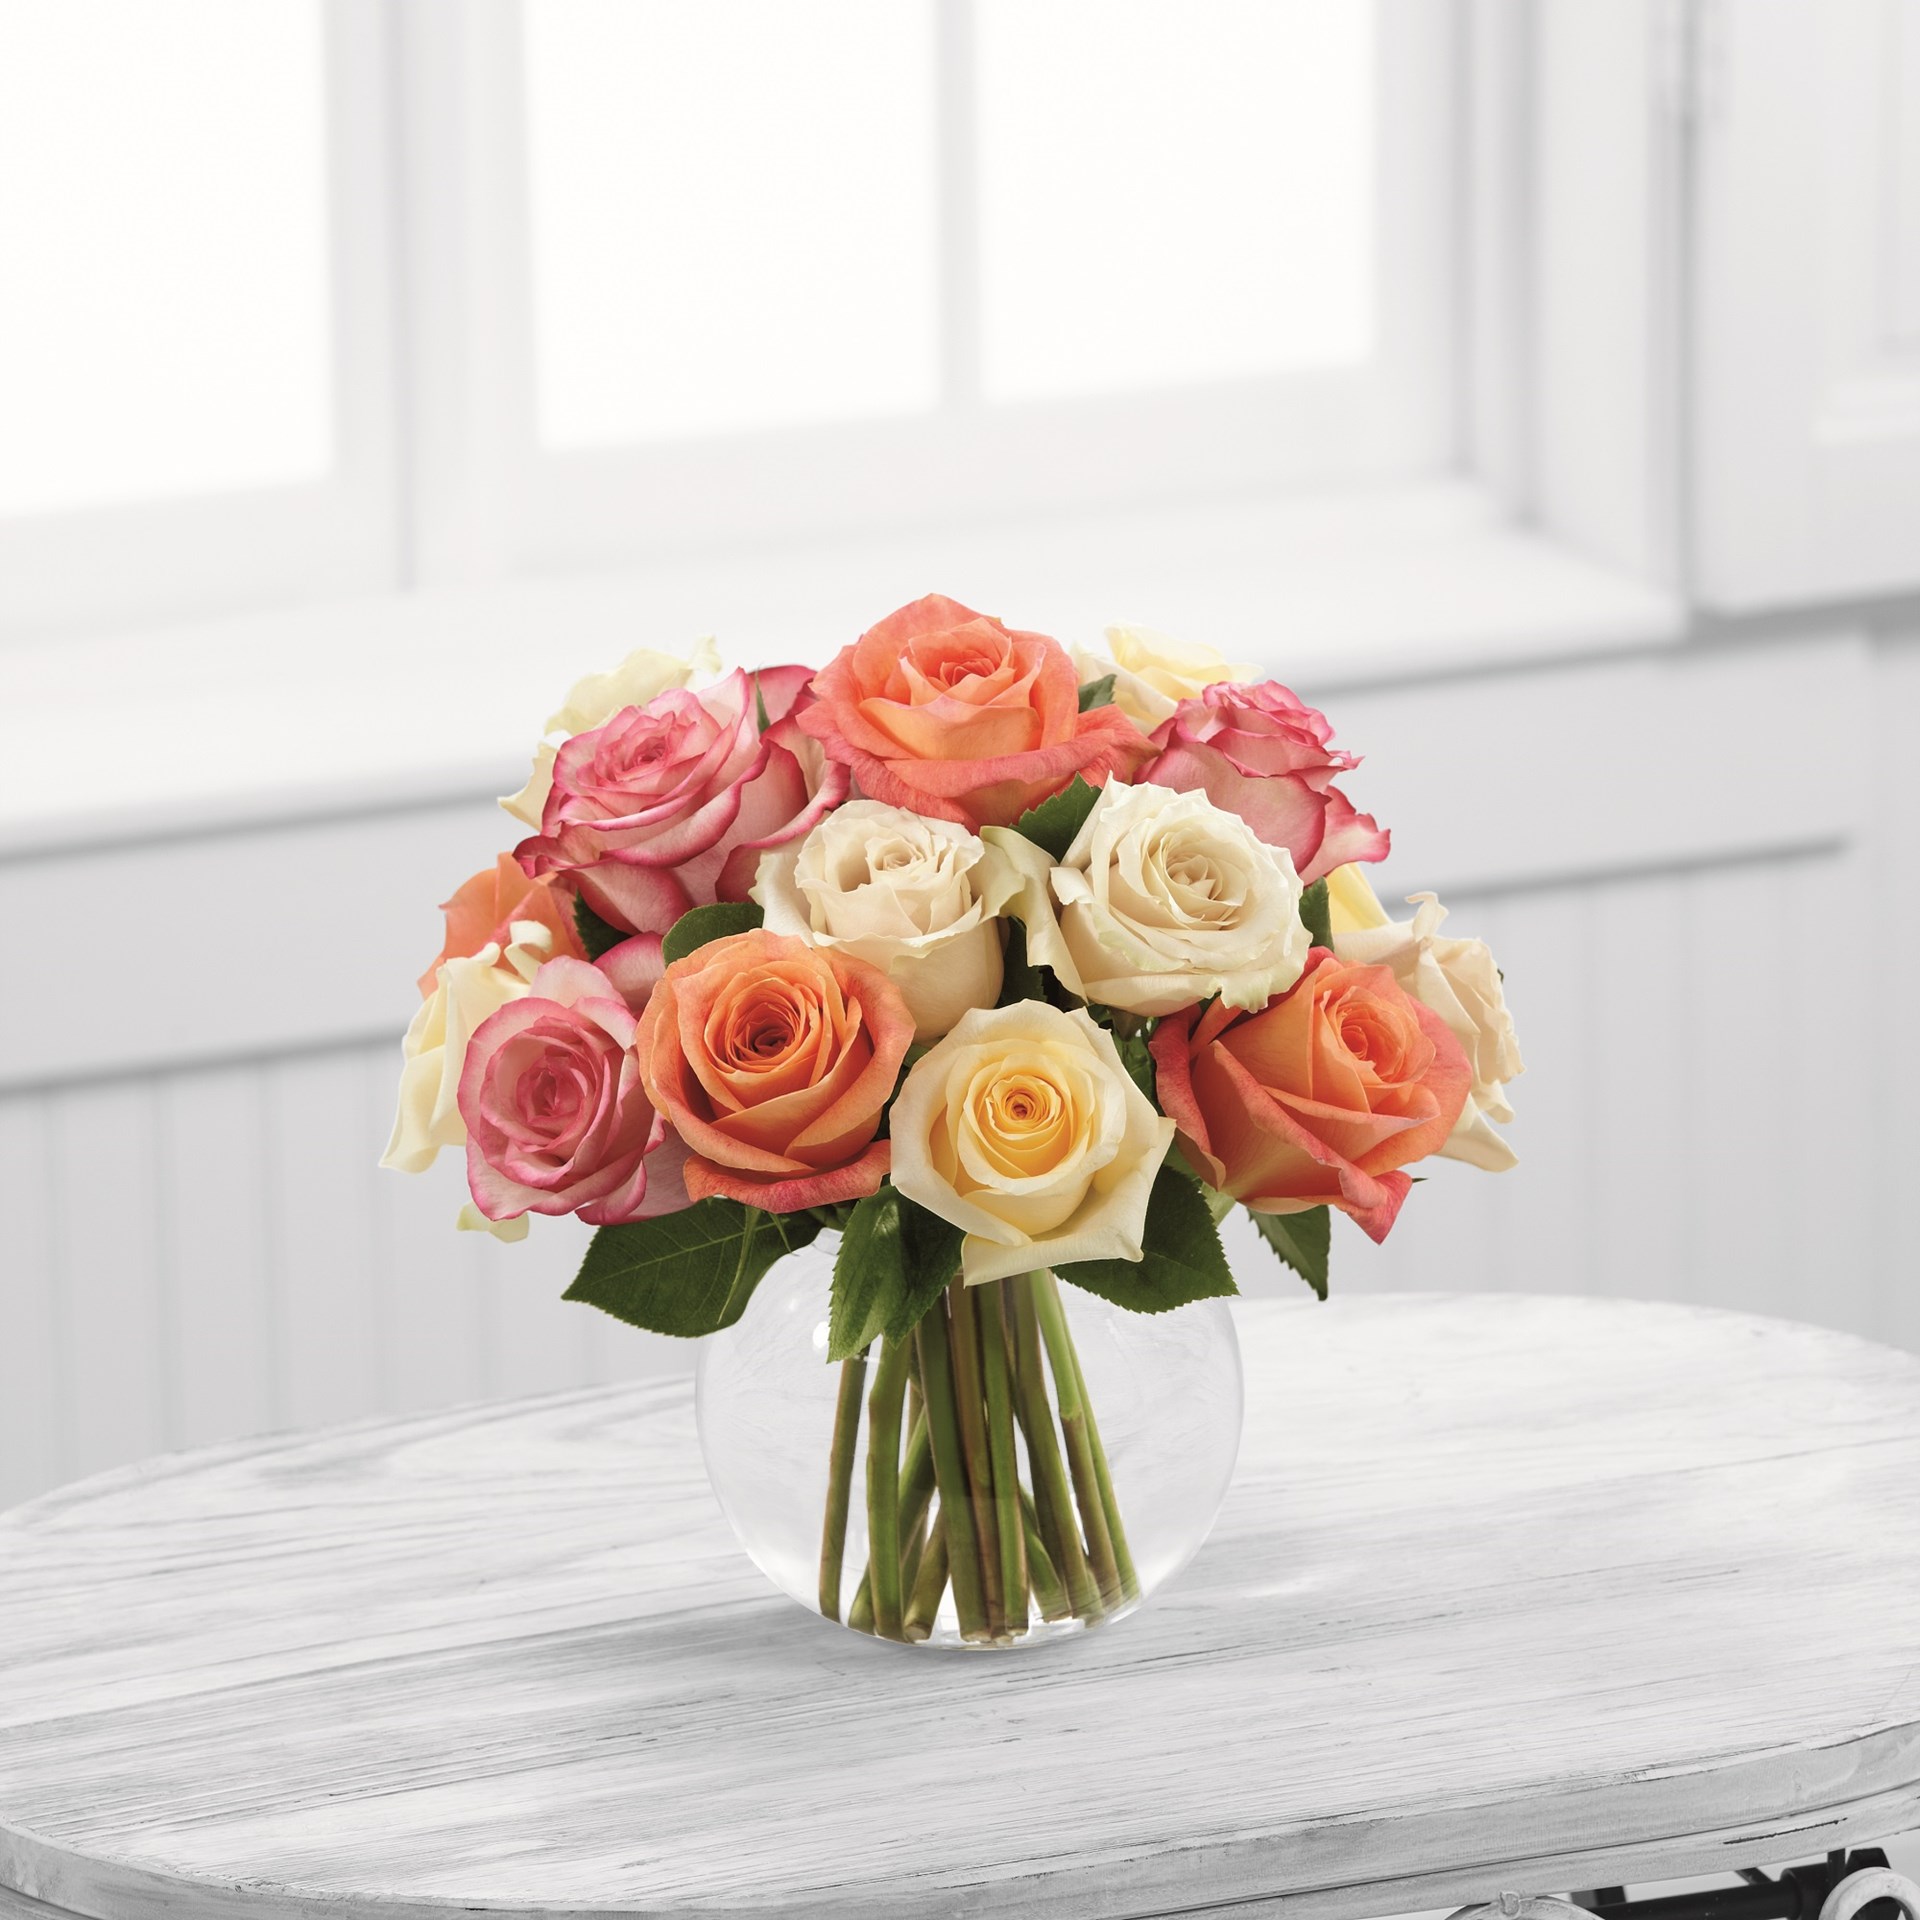 product image for The Sundance Rose Bouquet by FTD